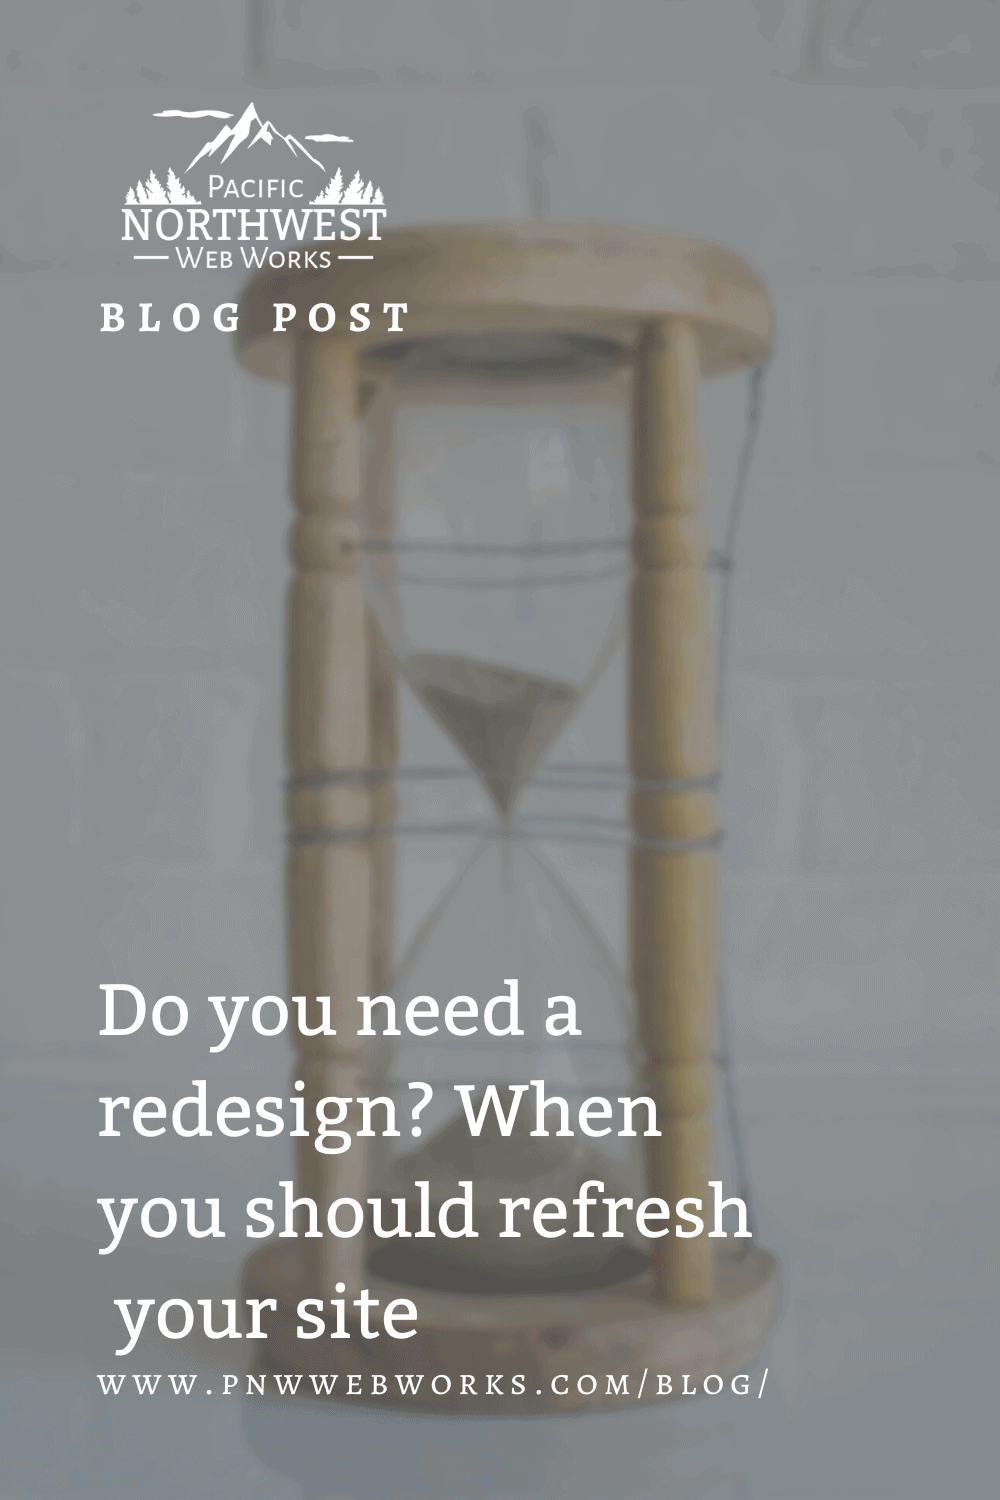 Do you need a redesign? When you should refresh your site